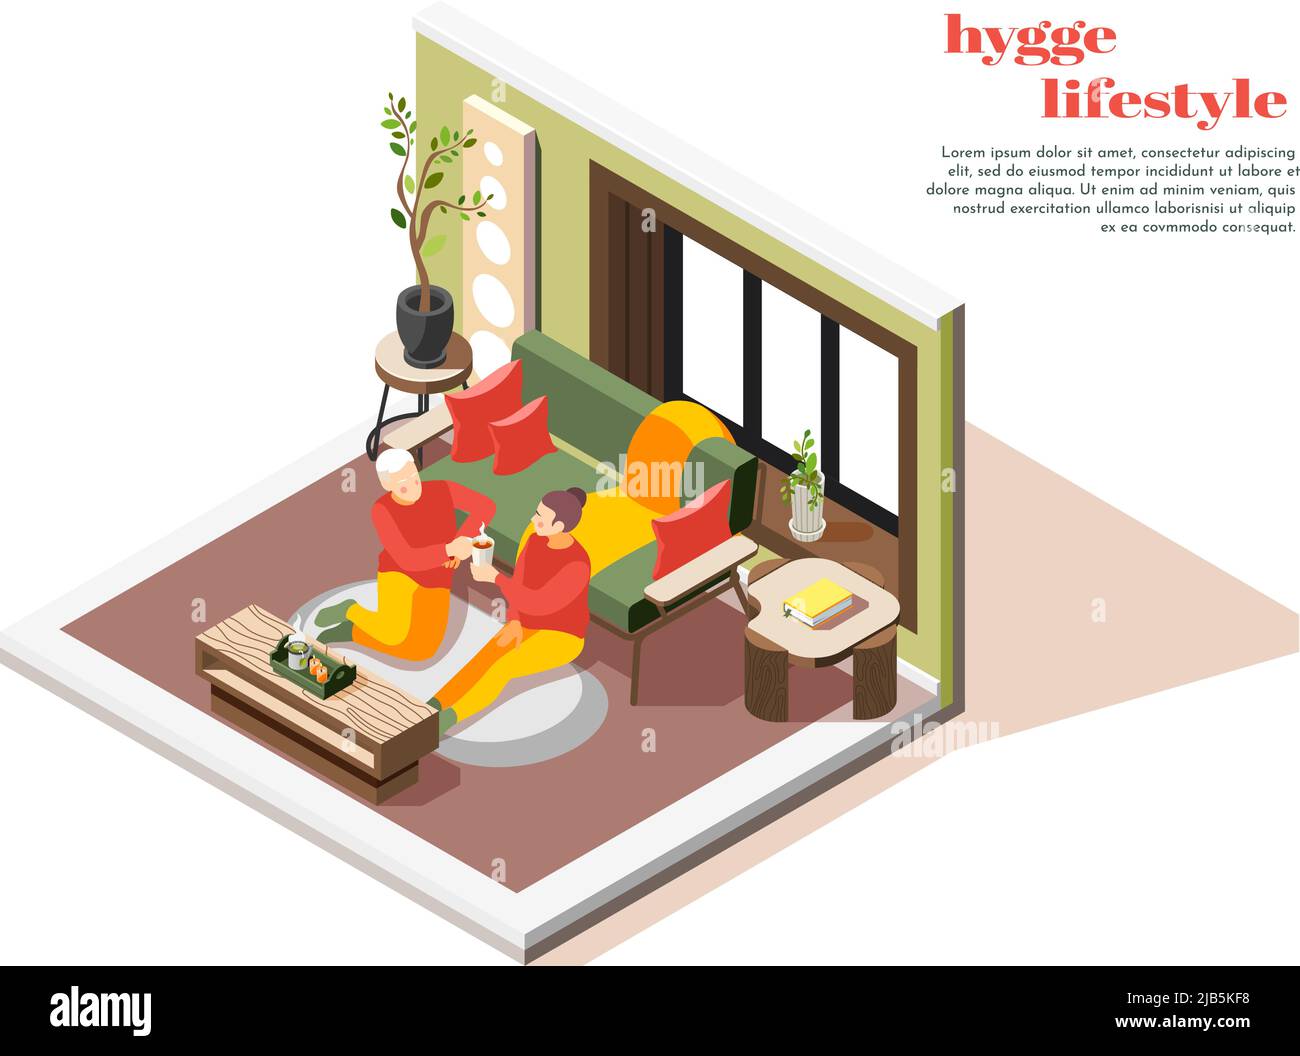 Hygge lifestyle isometric composition with couple comfortably sitting home on floor rug sipping hot chocolate vector illustration Stock Vector